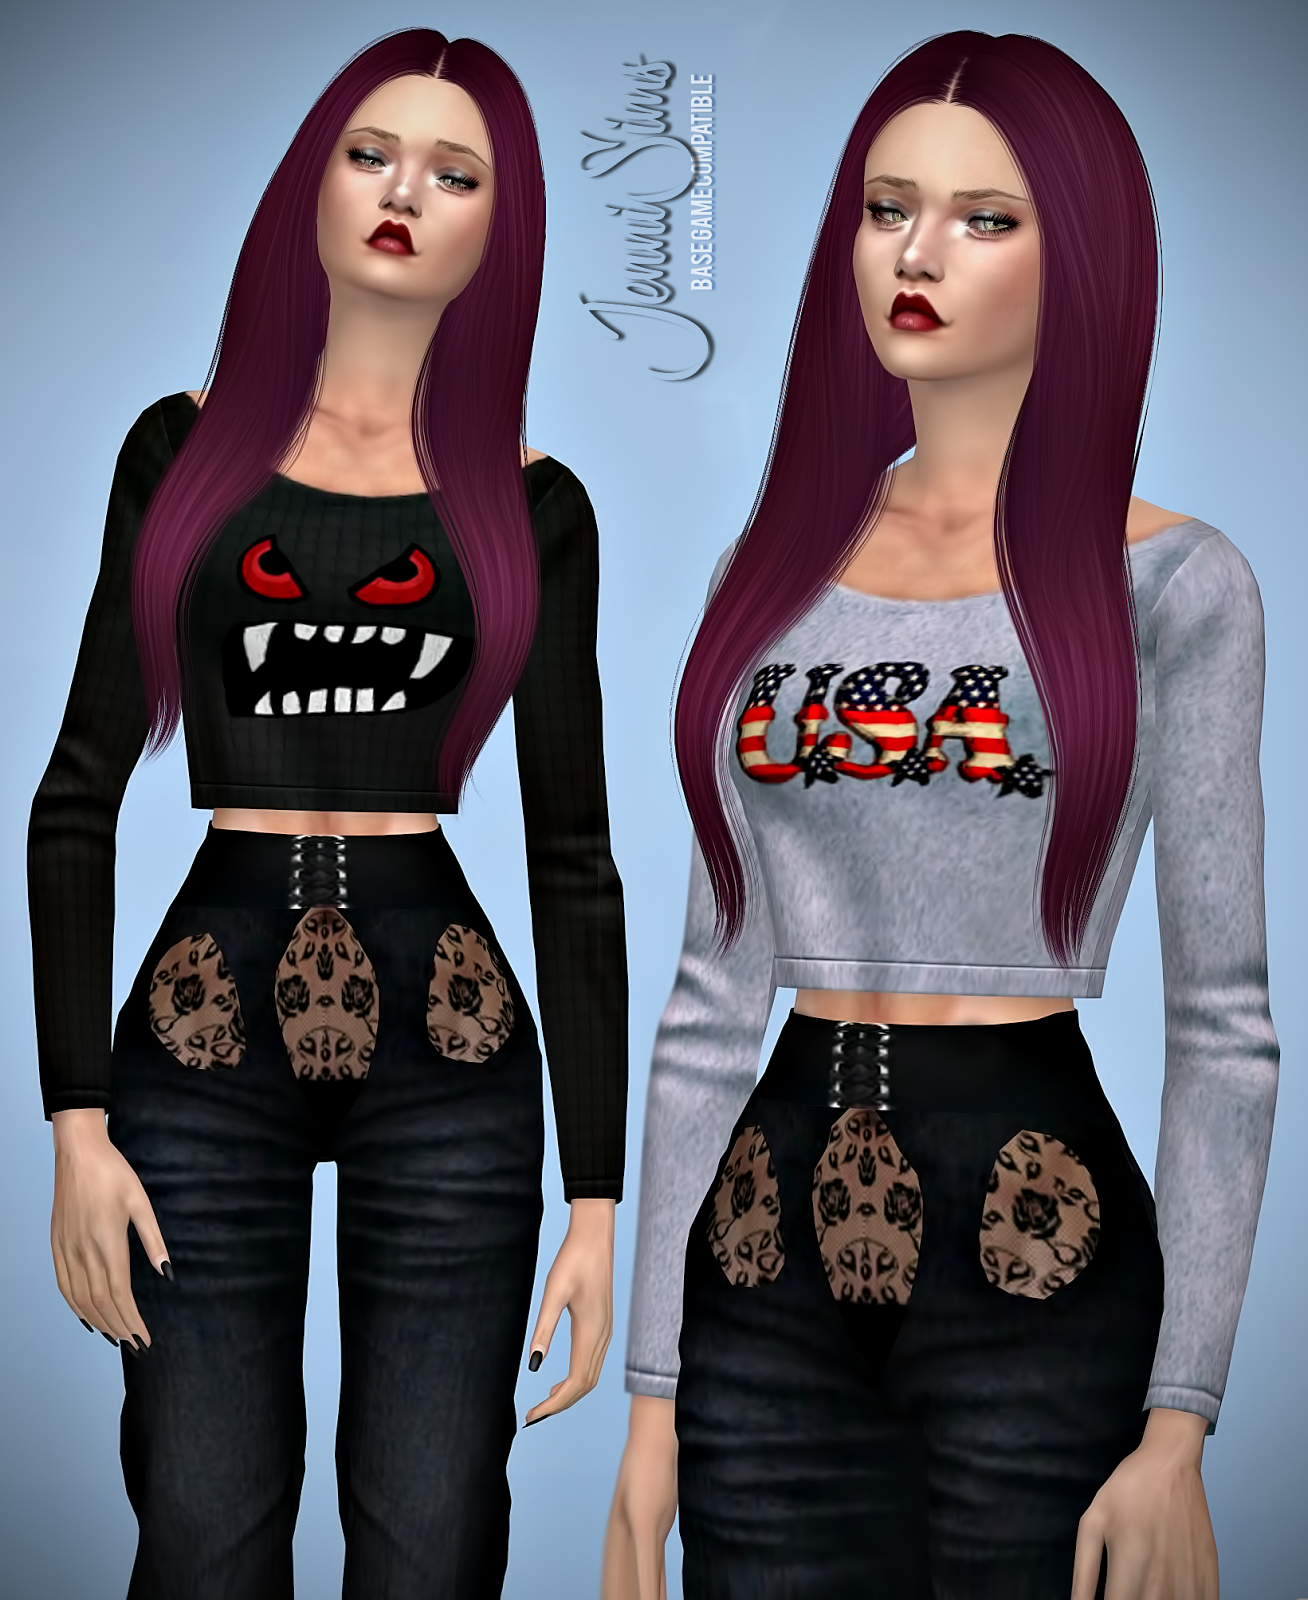 Downloads sims 4:Base Game compatible Top | JenniSims